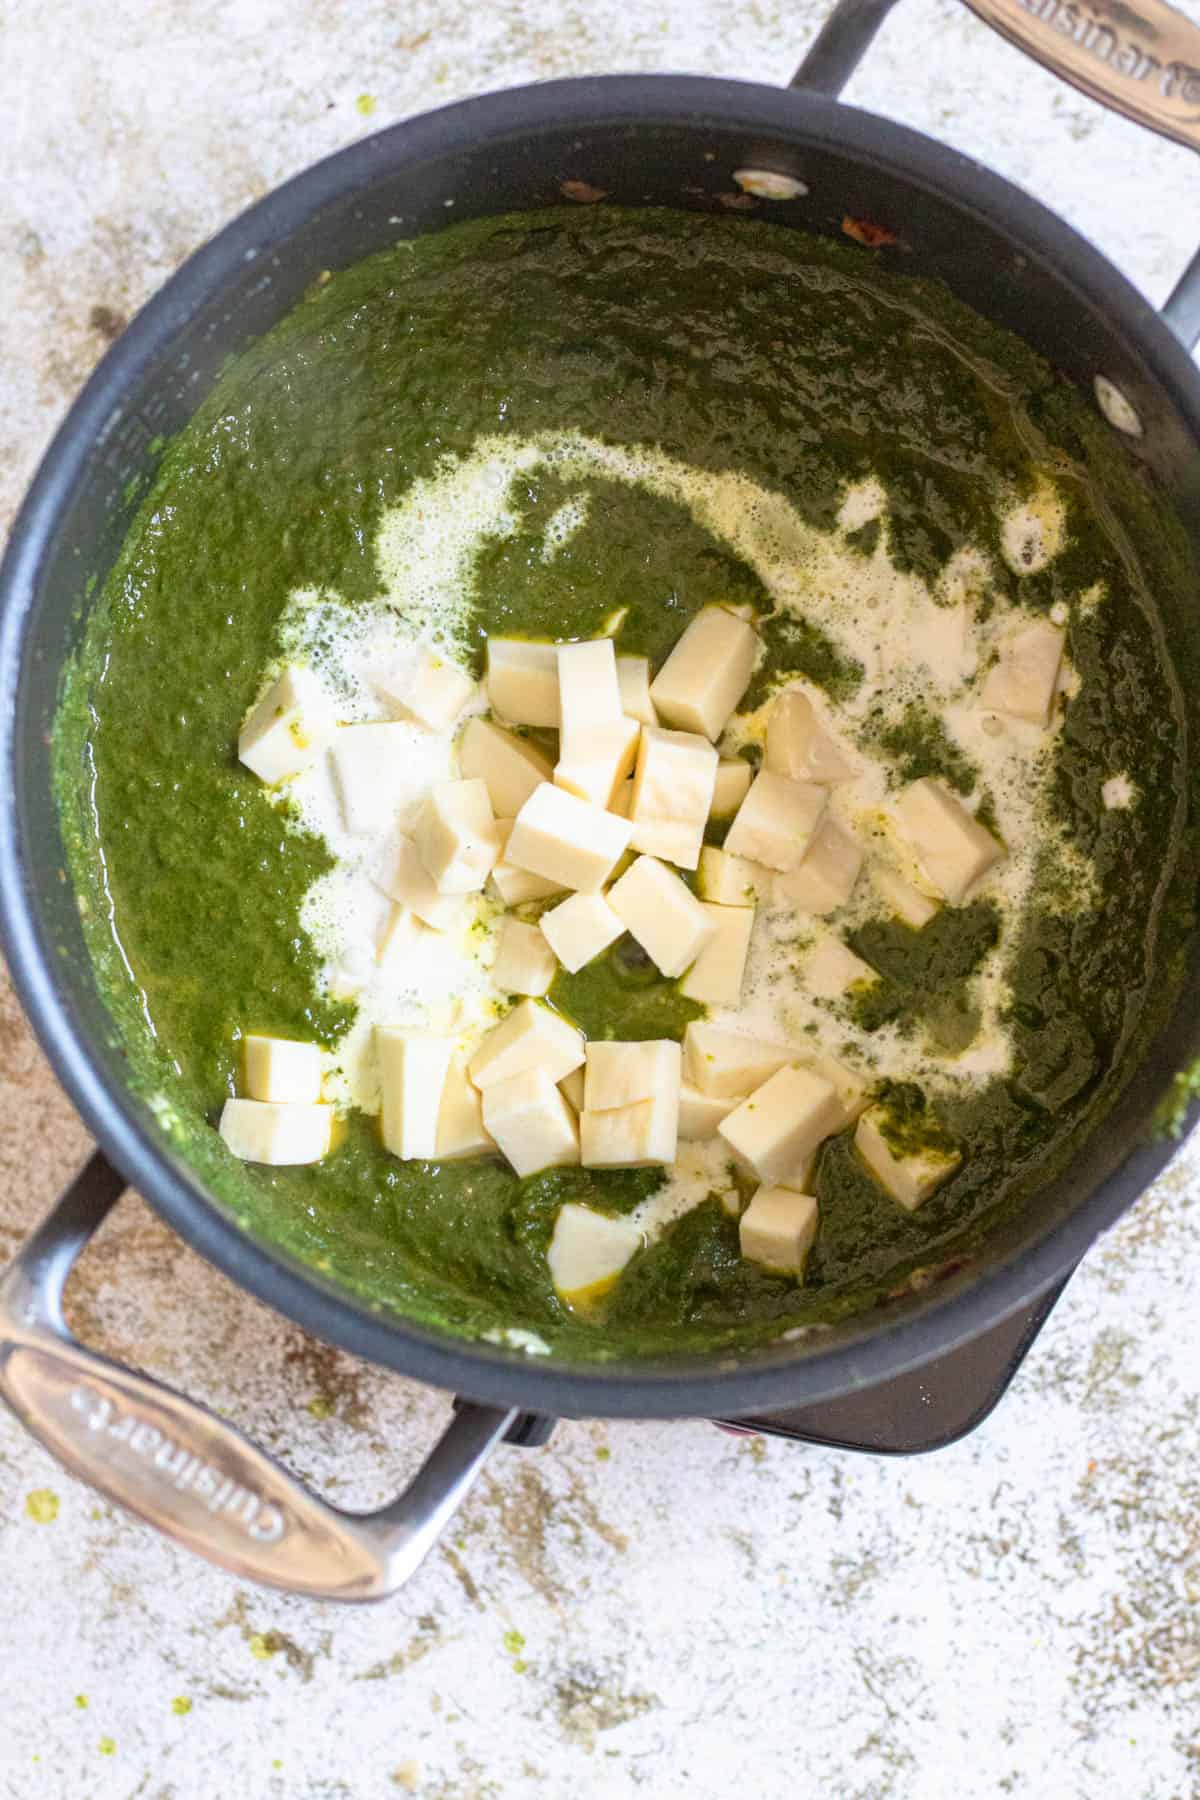 Paneer and heavy cream added to the palak mixture in a saucepan. 